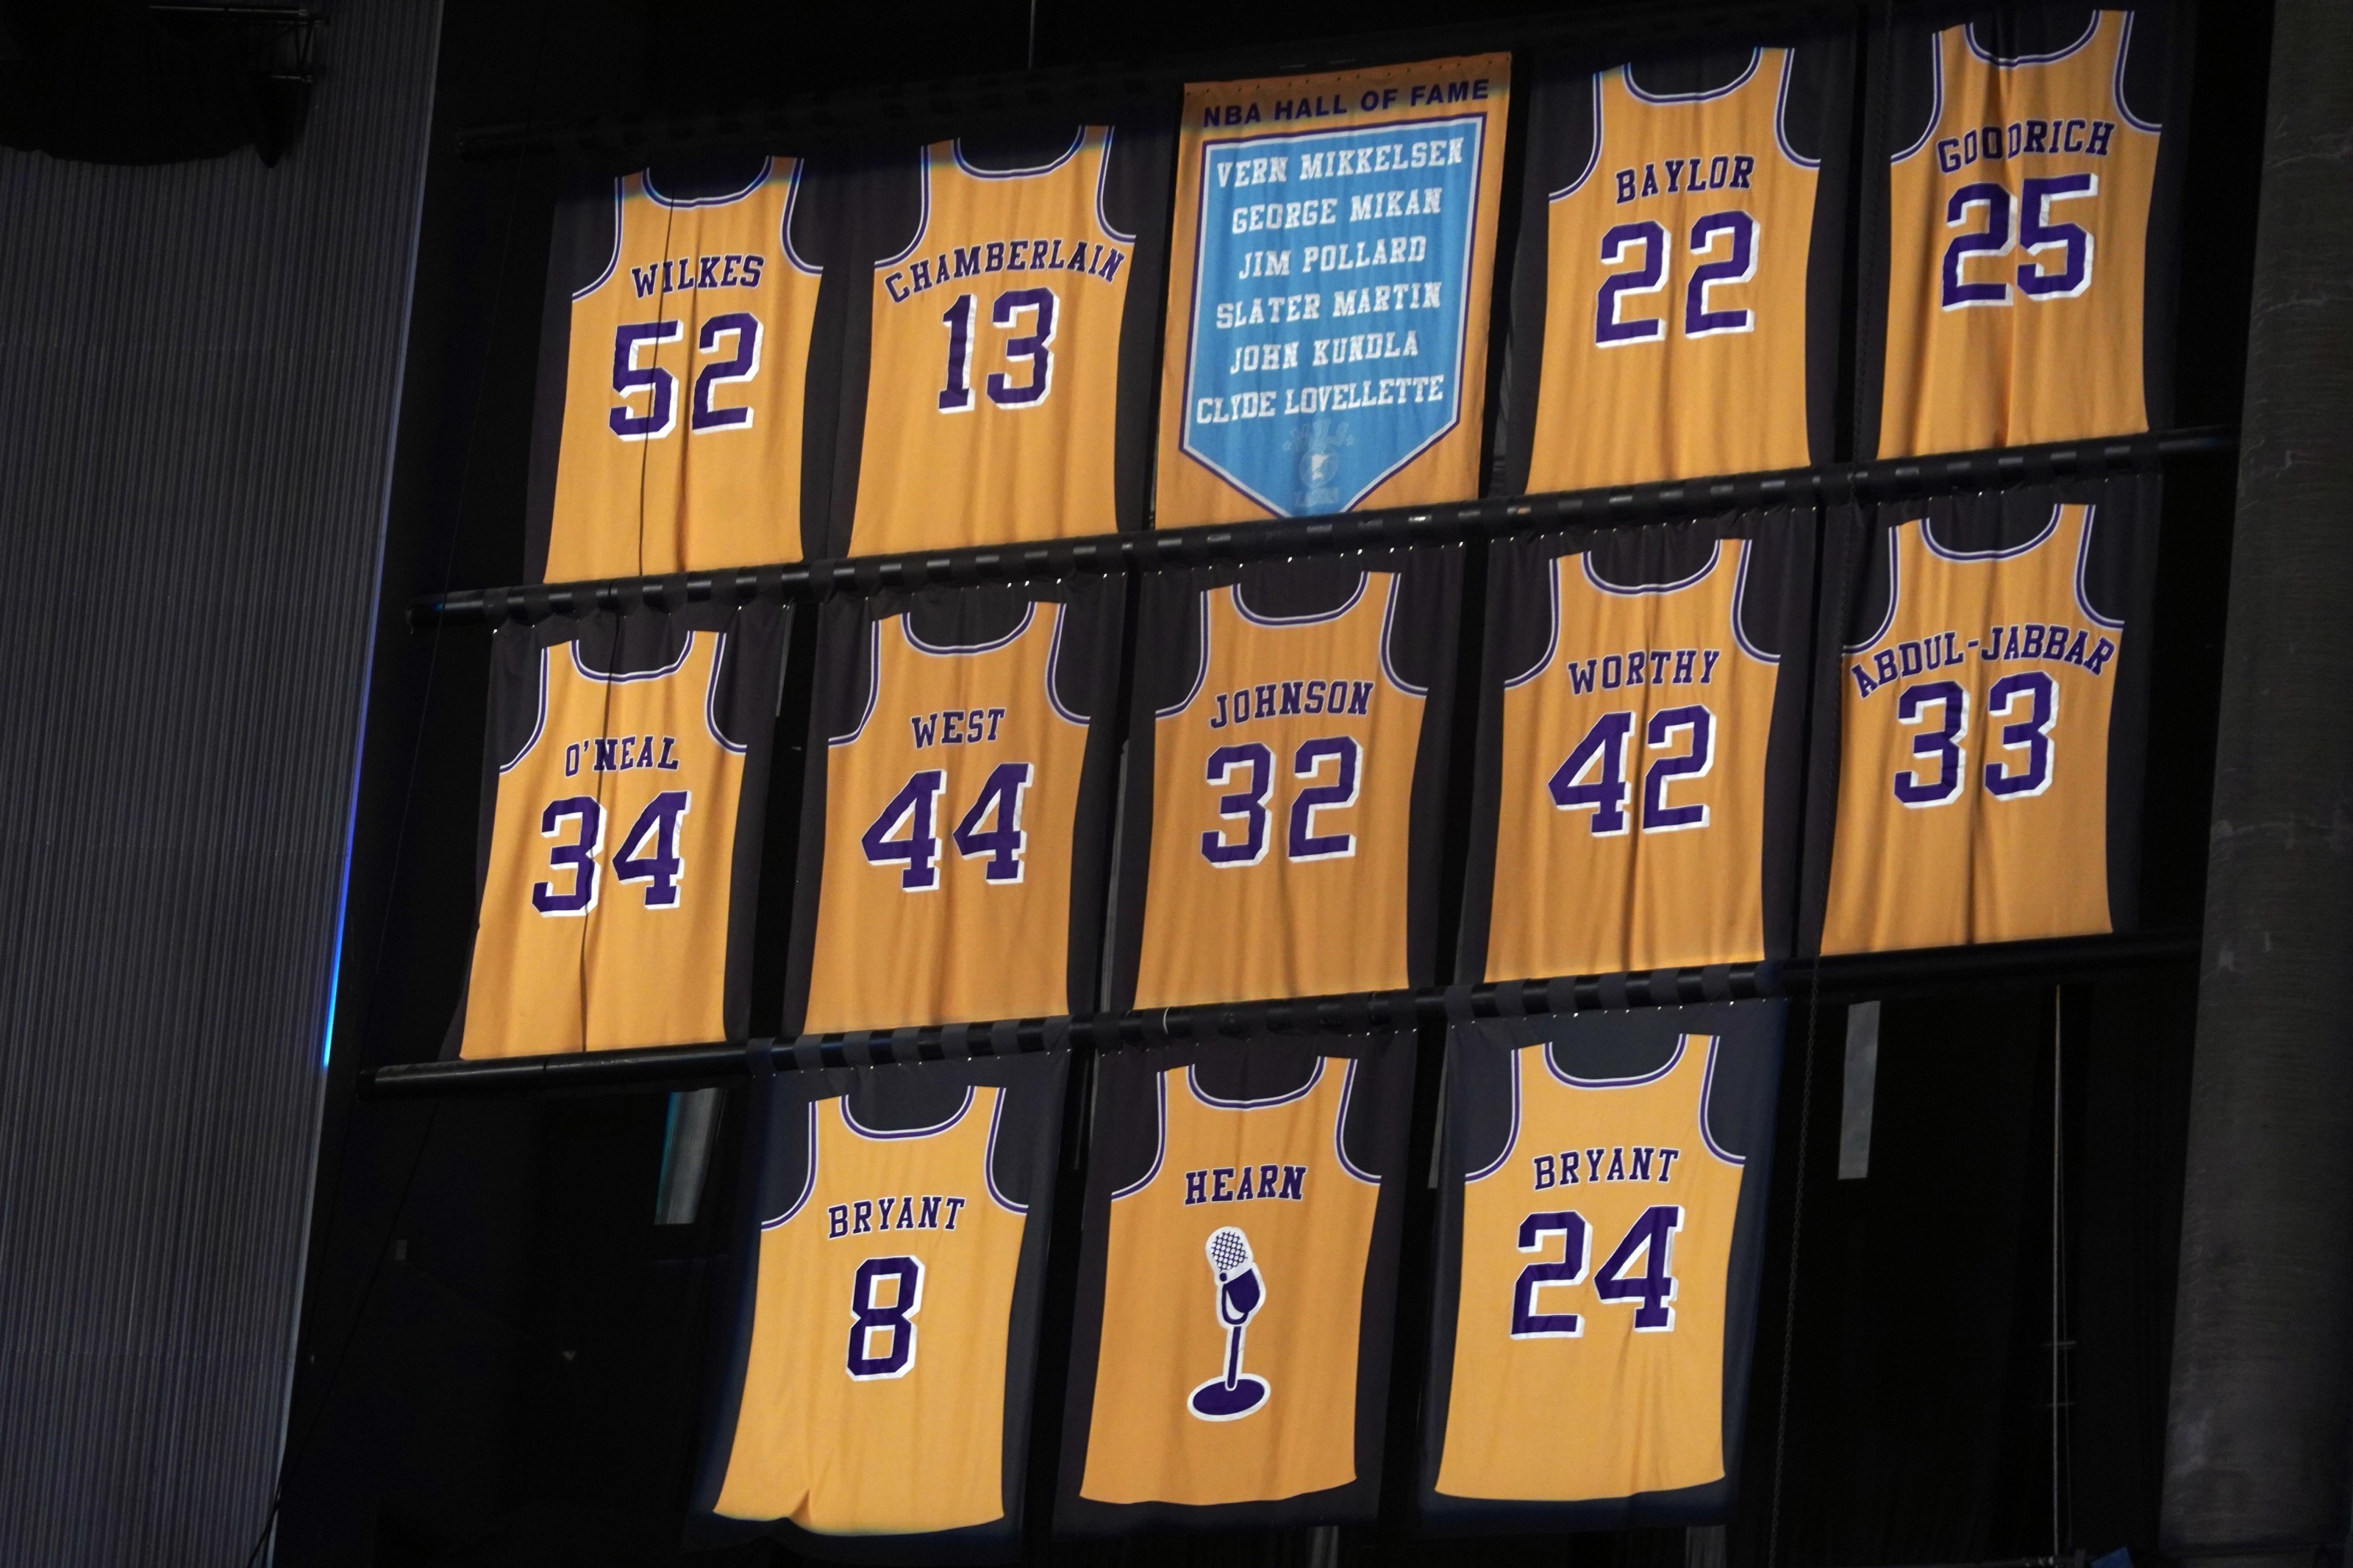 Elgin Baylor - One-of-a-Kind Minneapolis Lakers Jersey Found